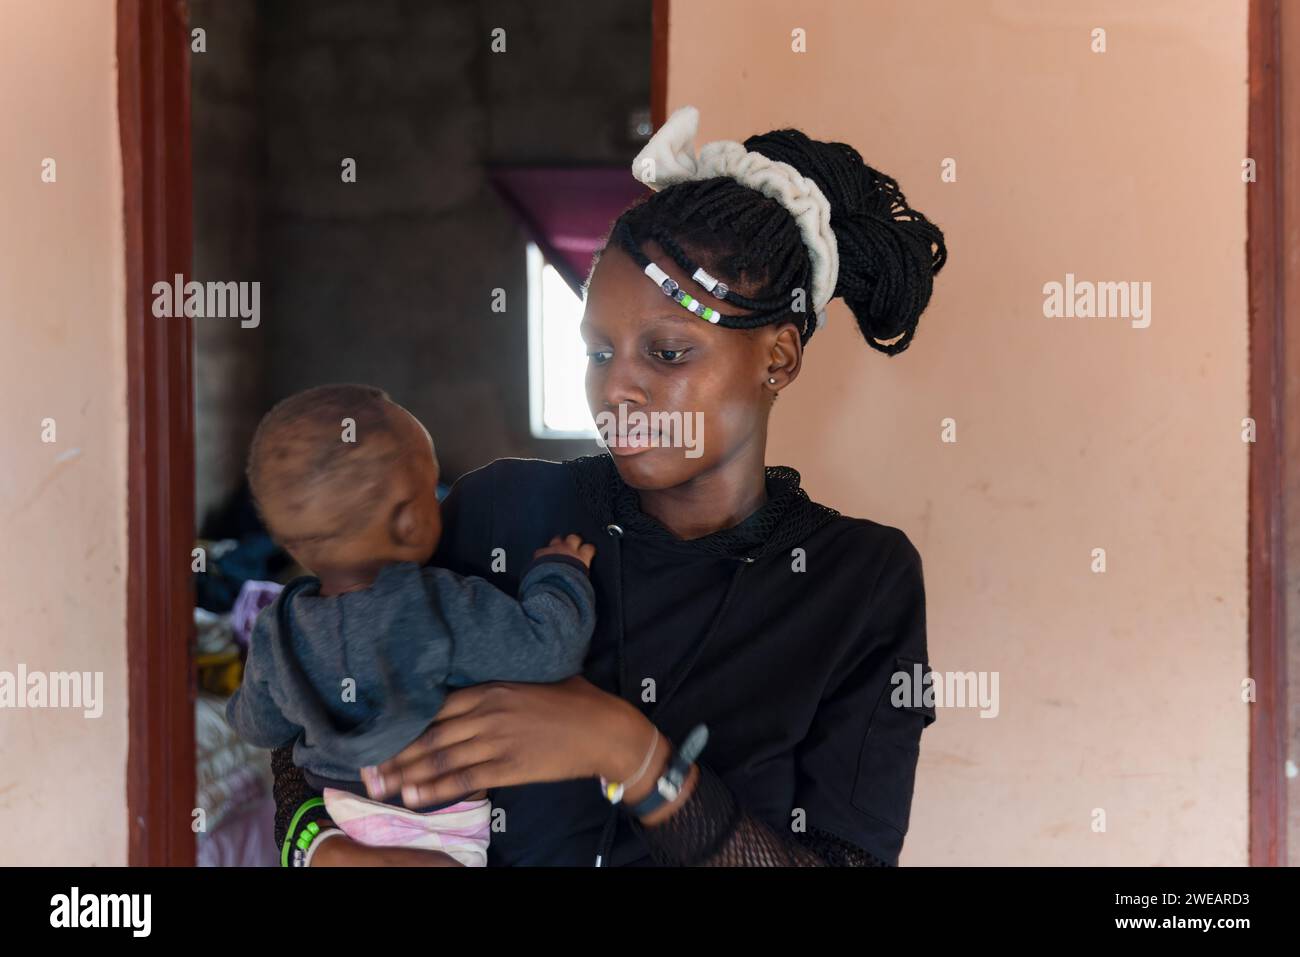 teenage pregnancy, village african girl with braids, holding a baby she is sited next to the door outside, Stock Photo